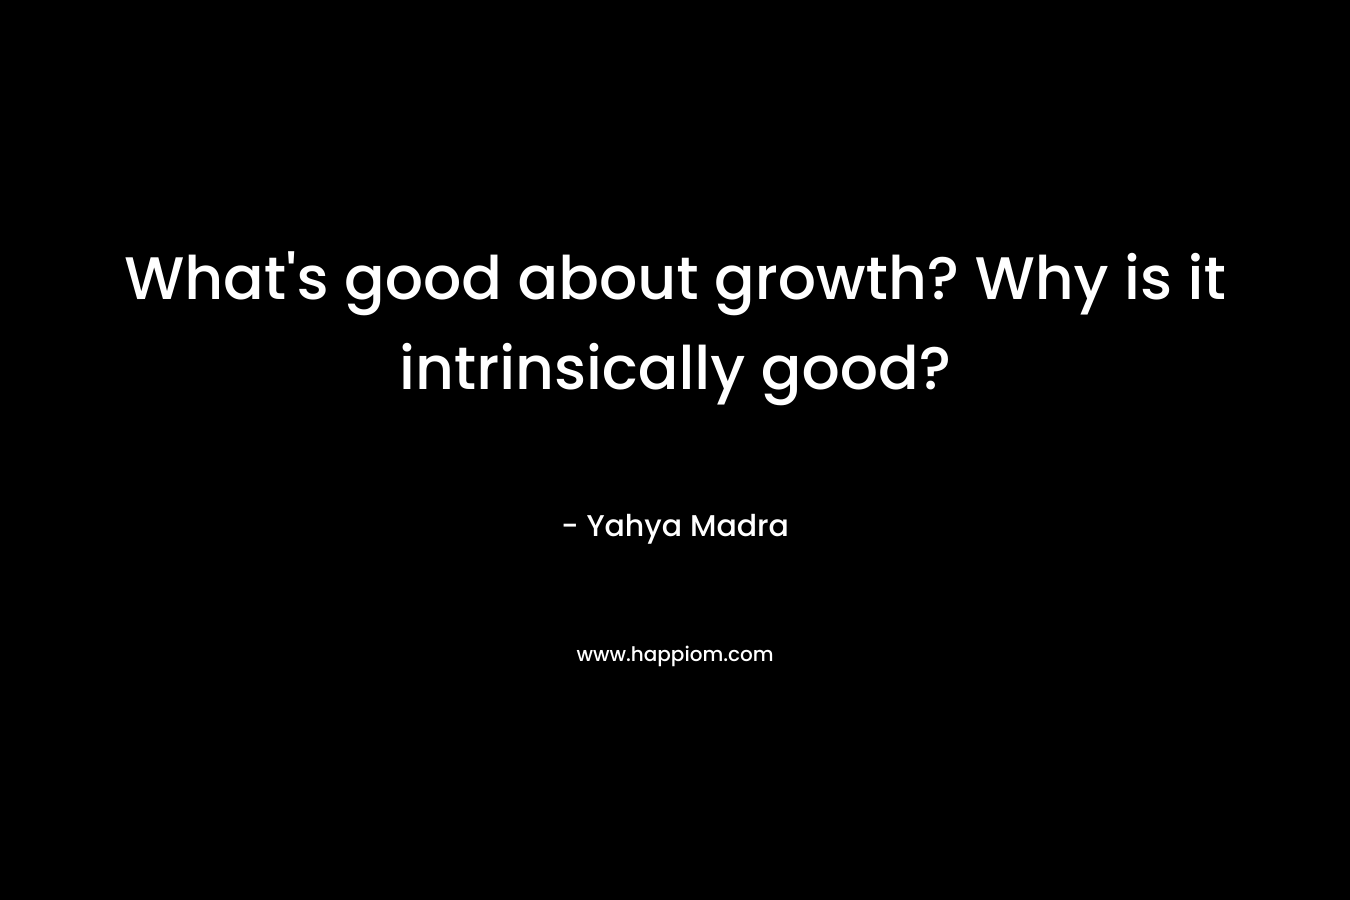 What's good about growth? Why is it intrinsically good?